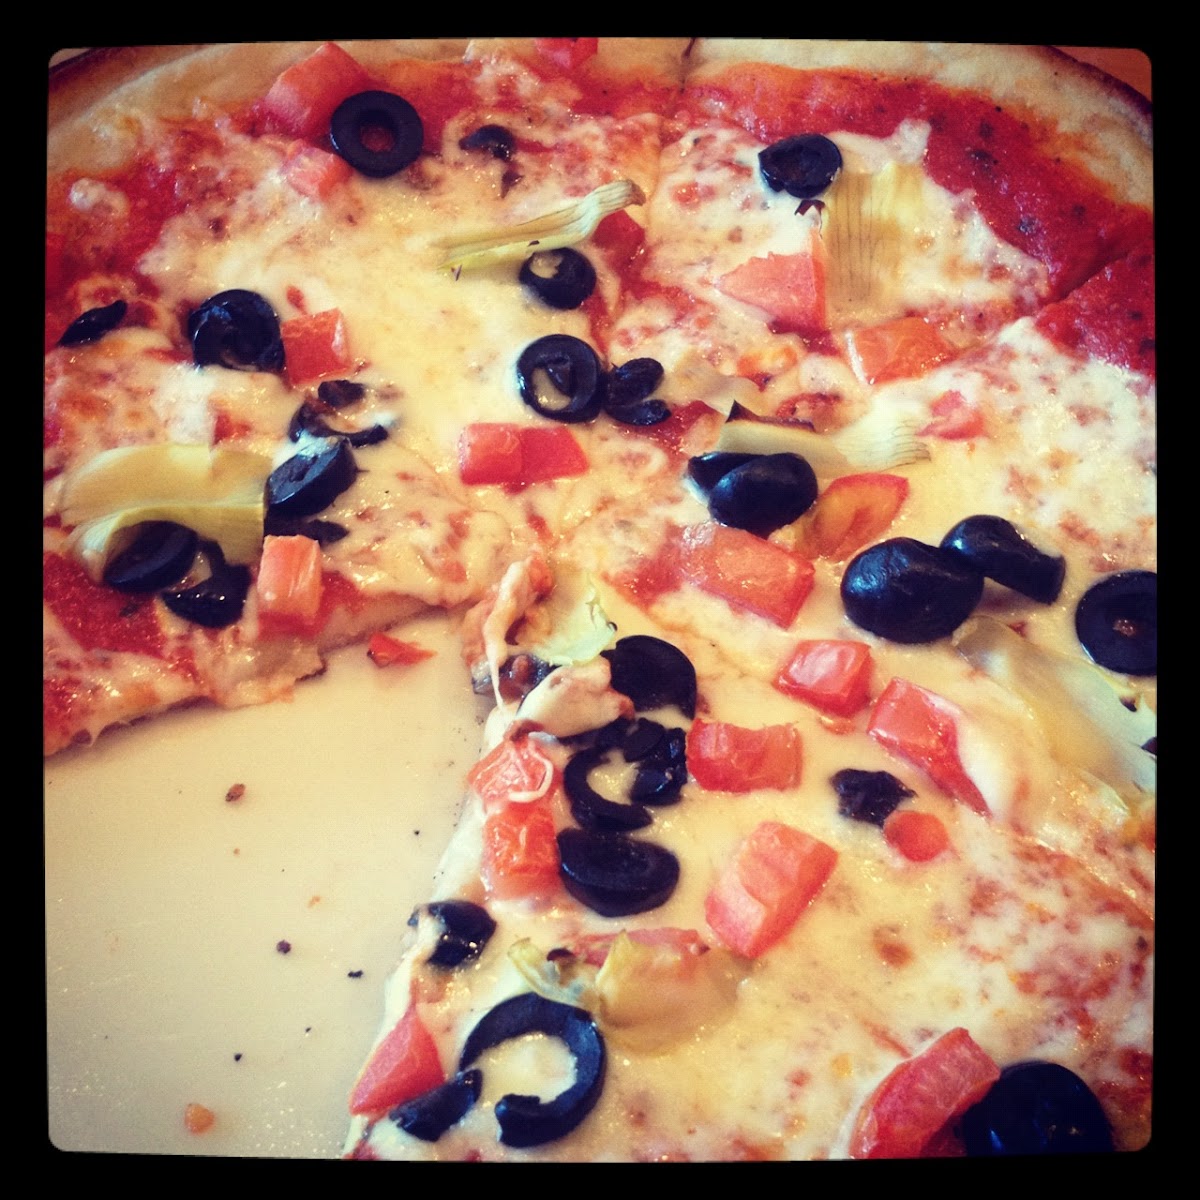 GF pizza with tomatoes, black olives and artichoke hearts